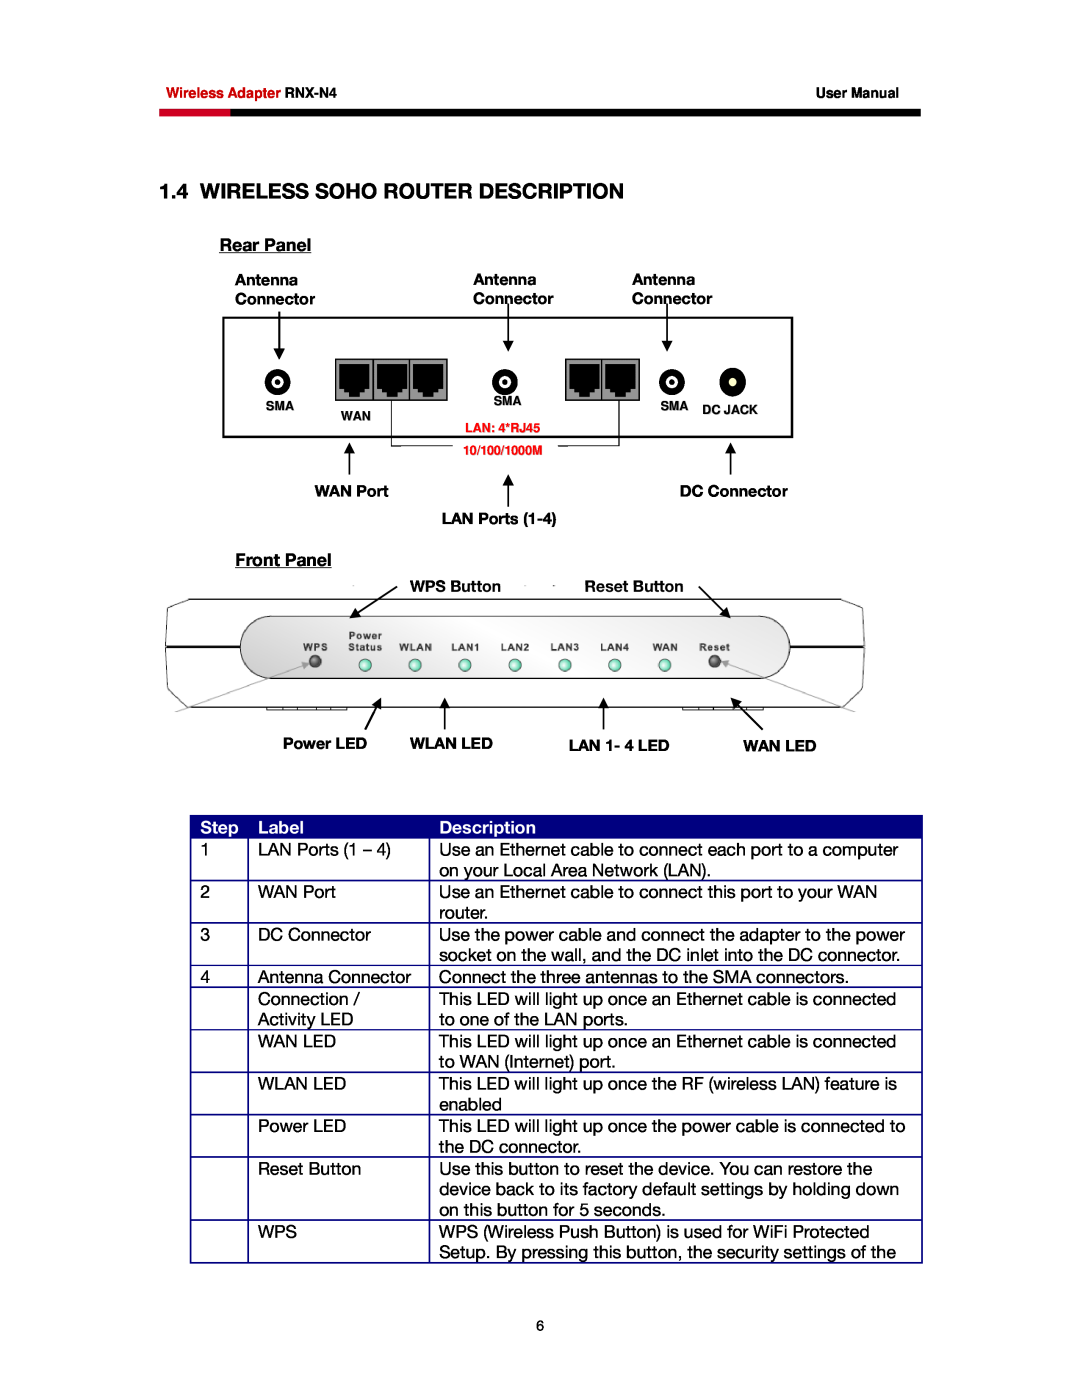 Rosewill RNX-N4 user manual Wireless Soho Router Description, Step, Label 